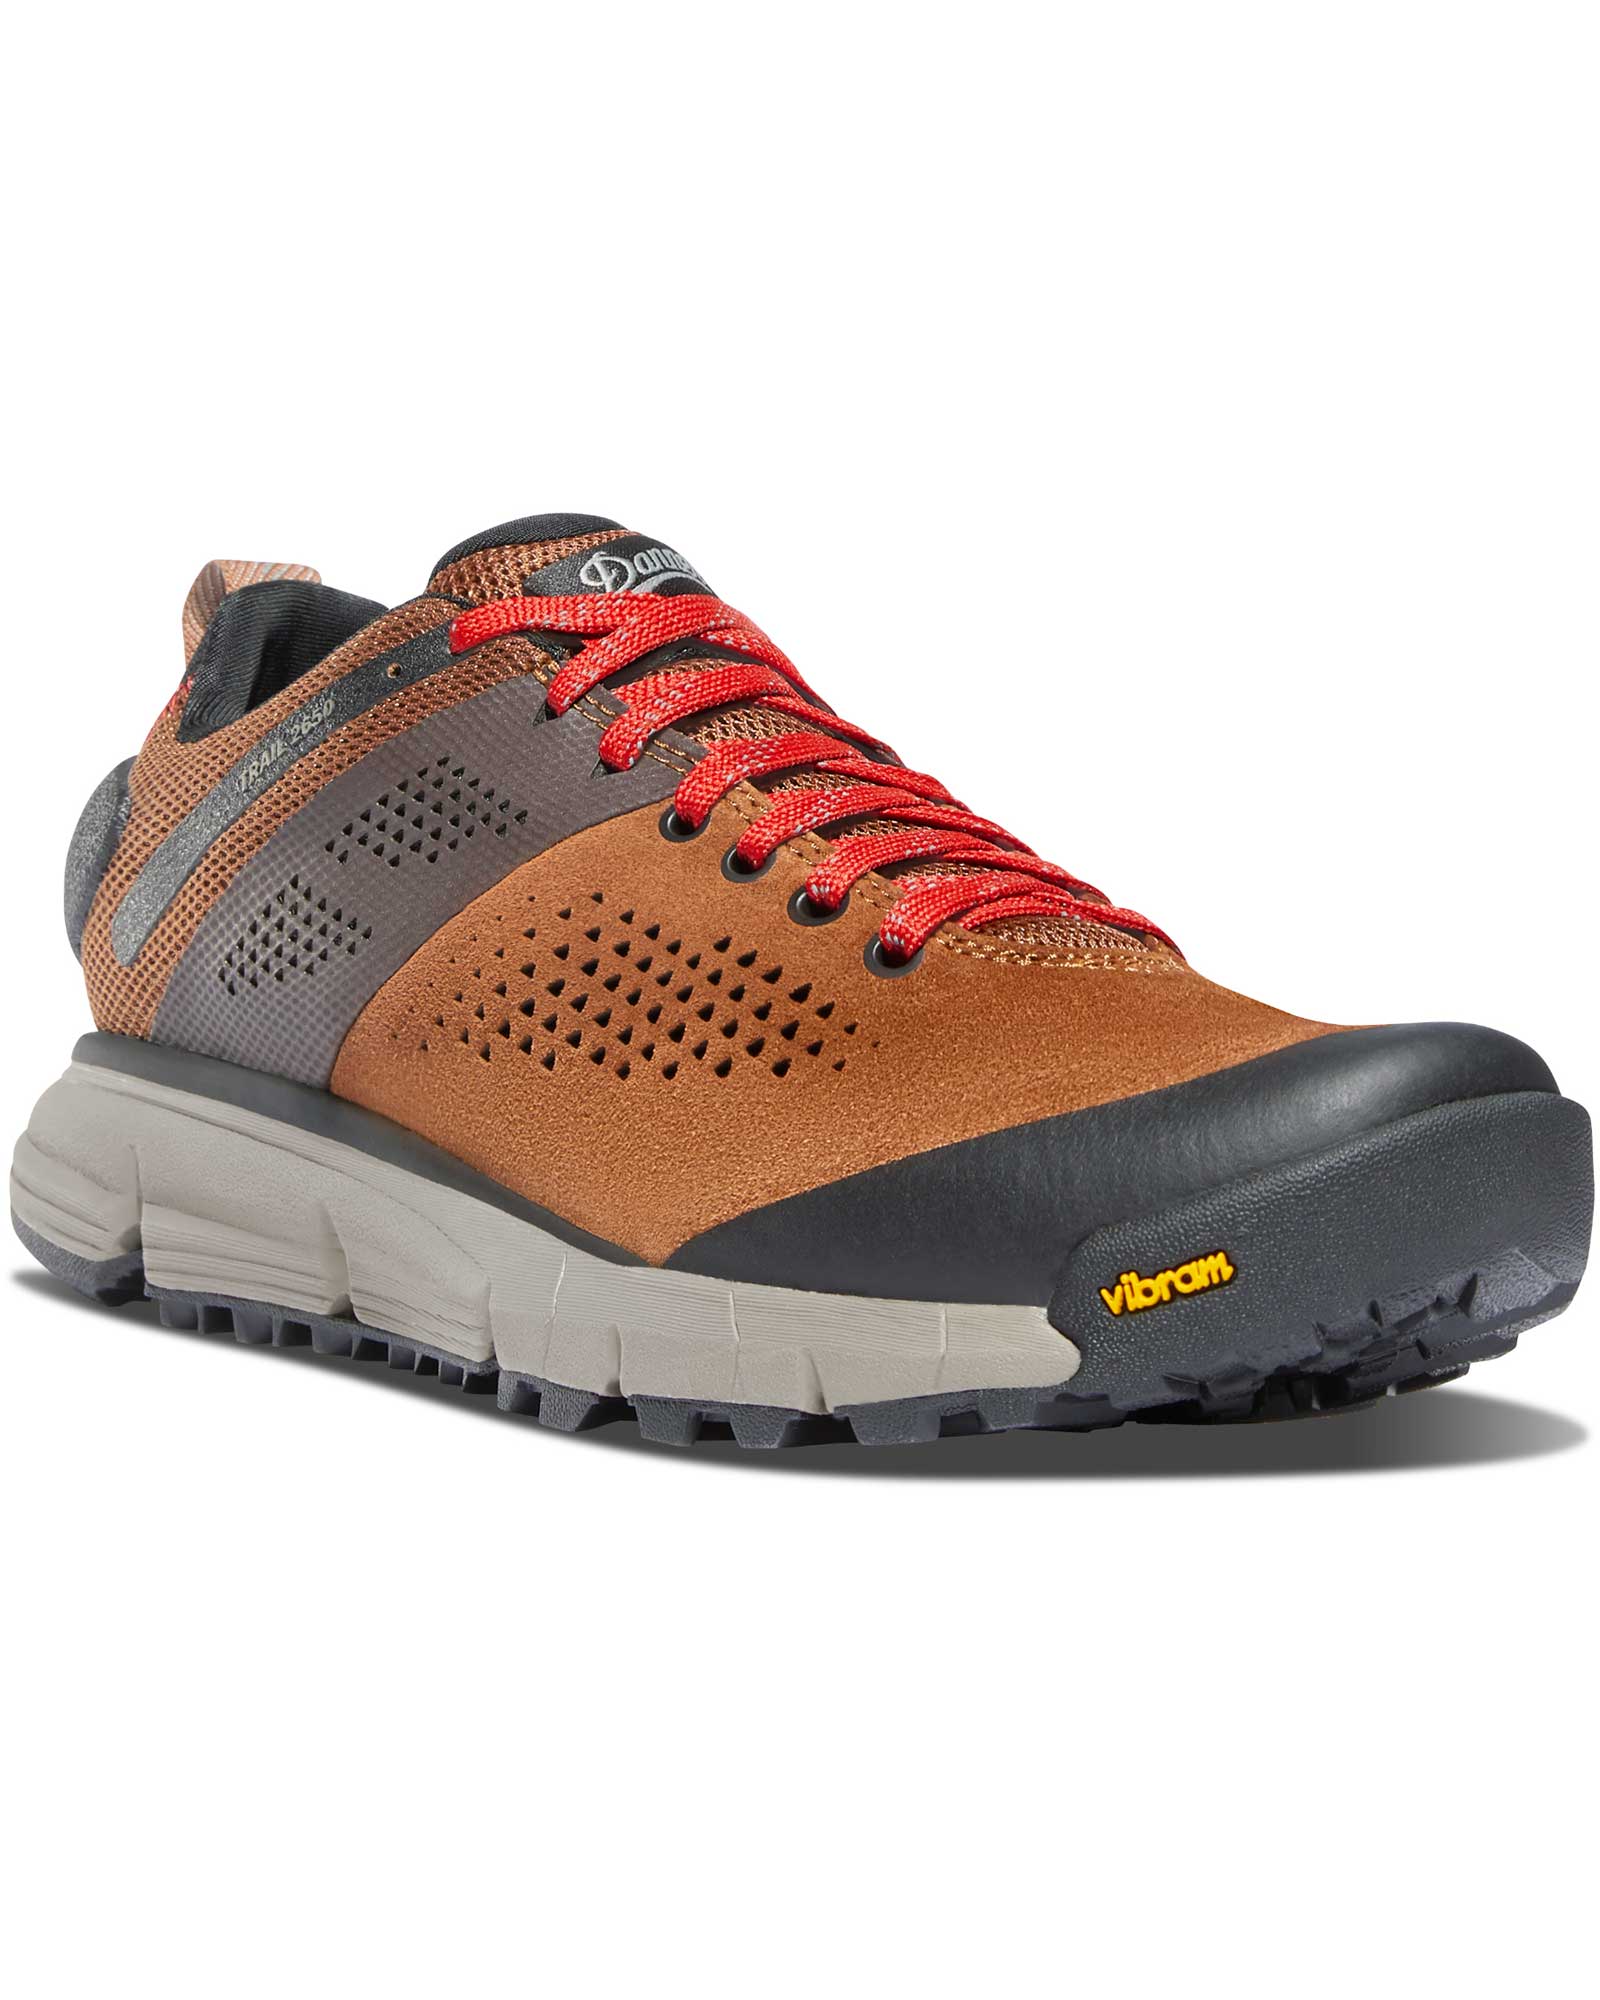 Danner Women’s Trail 2650 Trainers - Brown/Red UK 4.5